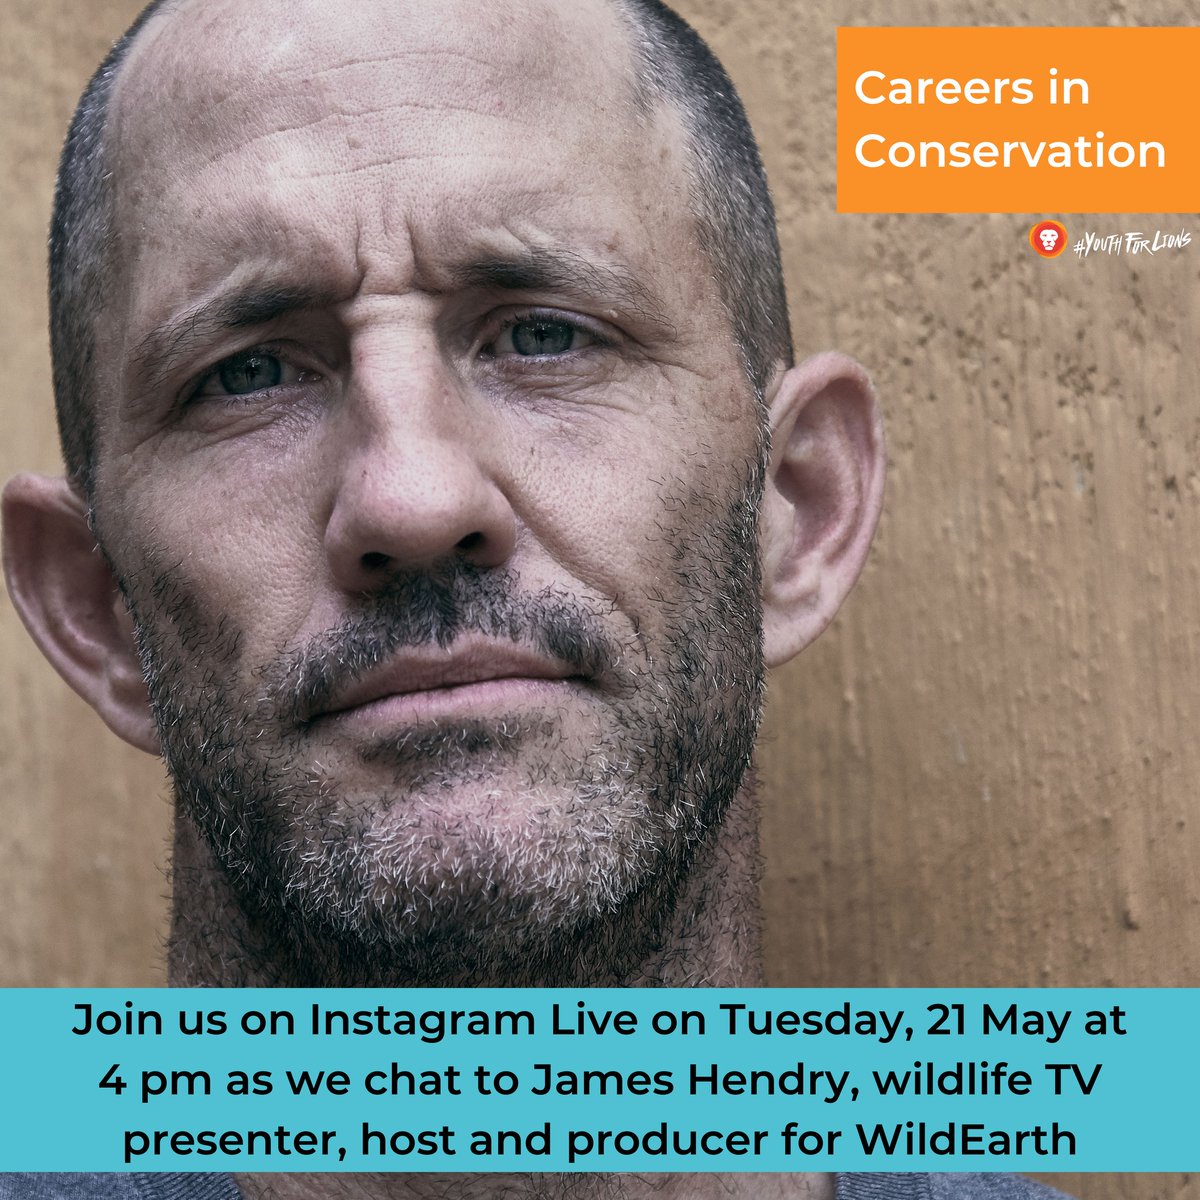 🦁YOUTHFORLIONS & JAMES HENDRY – INSTAGRAM LIVE🦁 Join @YouthForLions live on Instagram next week as they chat to James Hendry, a wildlife TV presenter, host and producer from Wildearth TV. DATE: Tuesday, 21 May TIME: 16h00 SAST Don't miss out on this exciting Live next week!